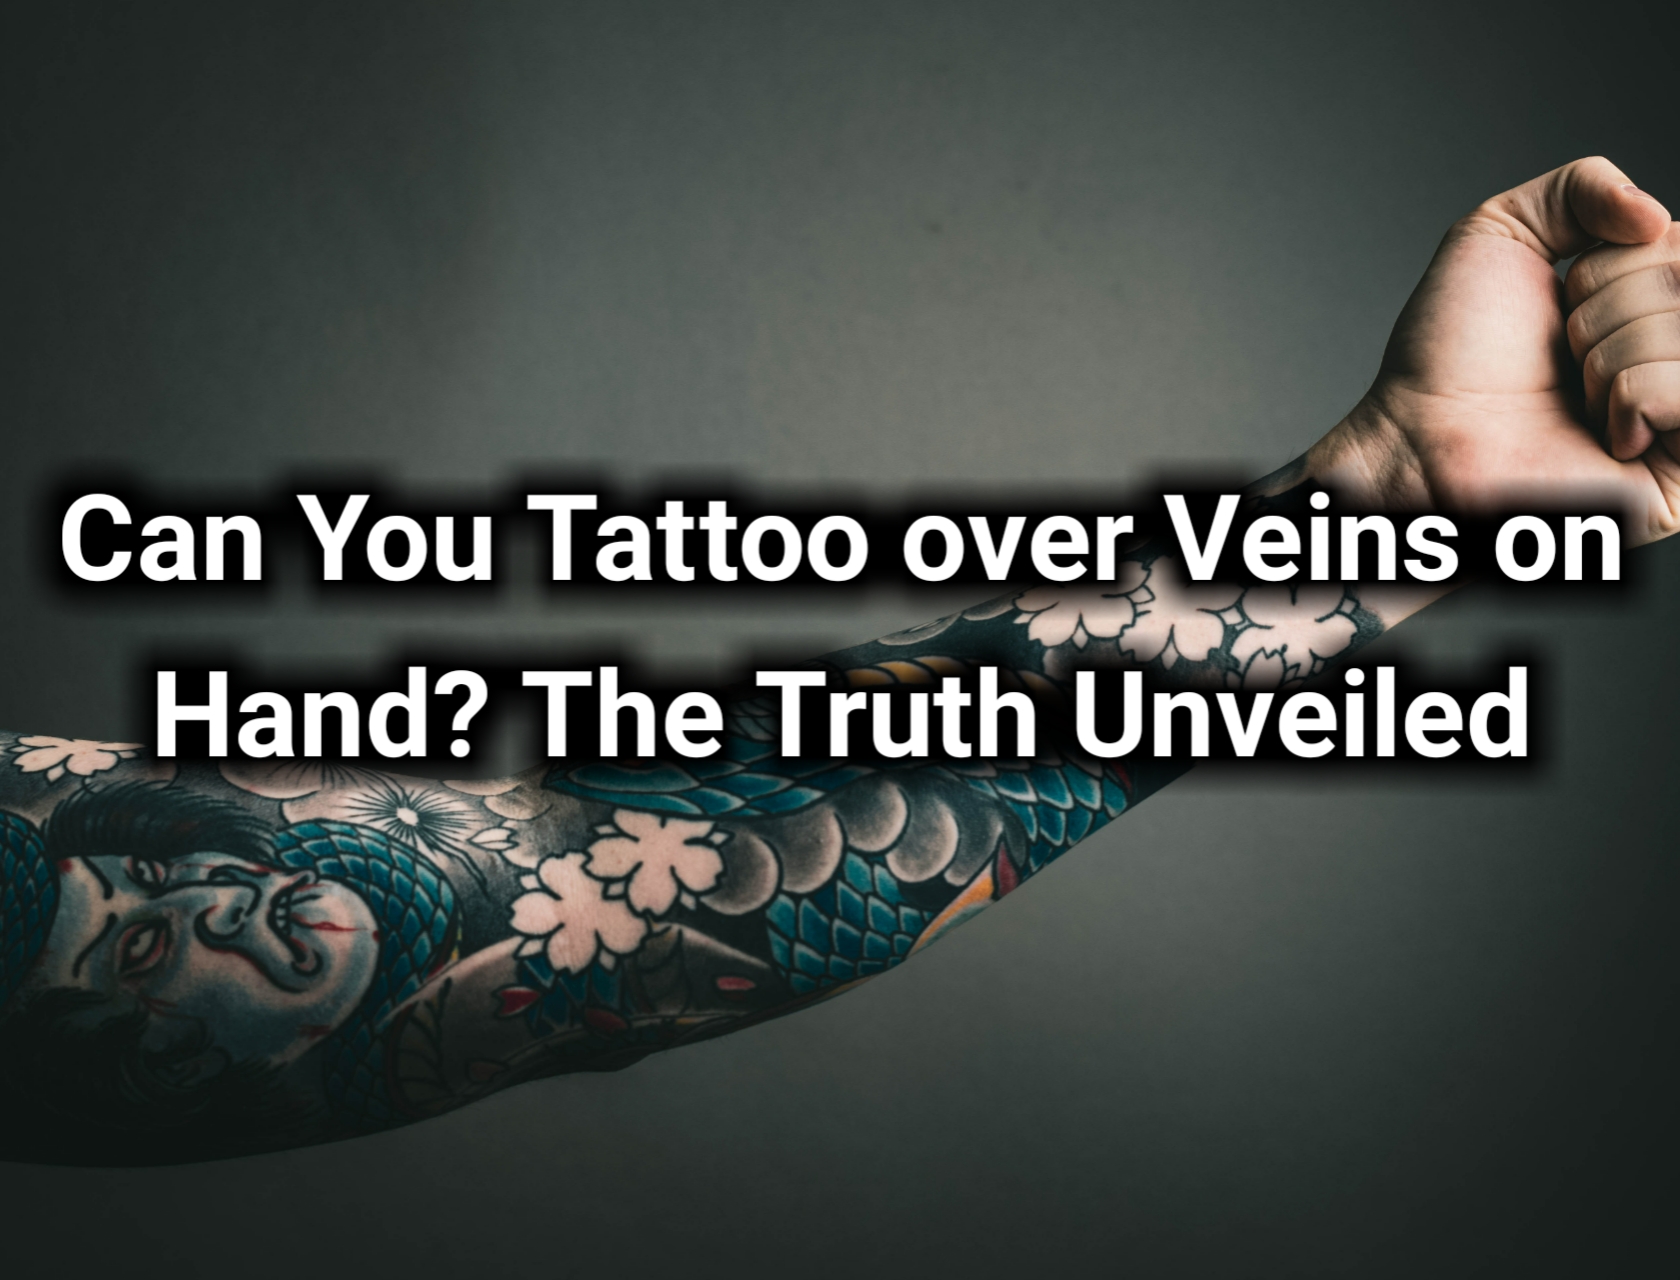 Can you tattoo over veins on hand